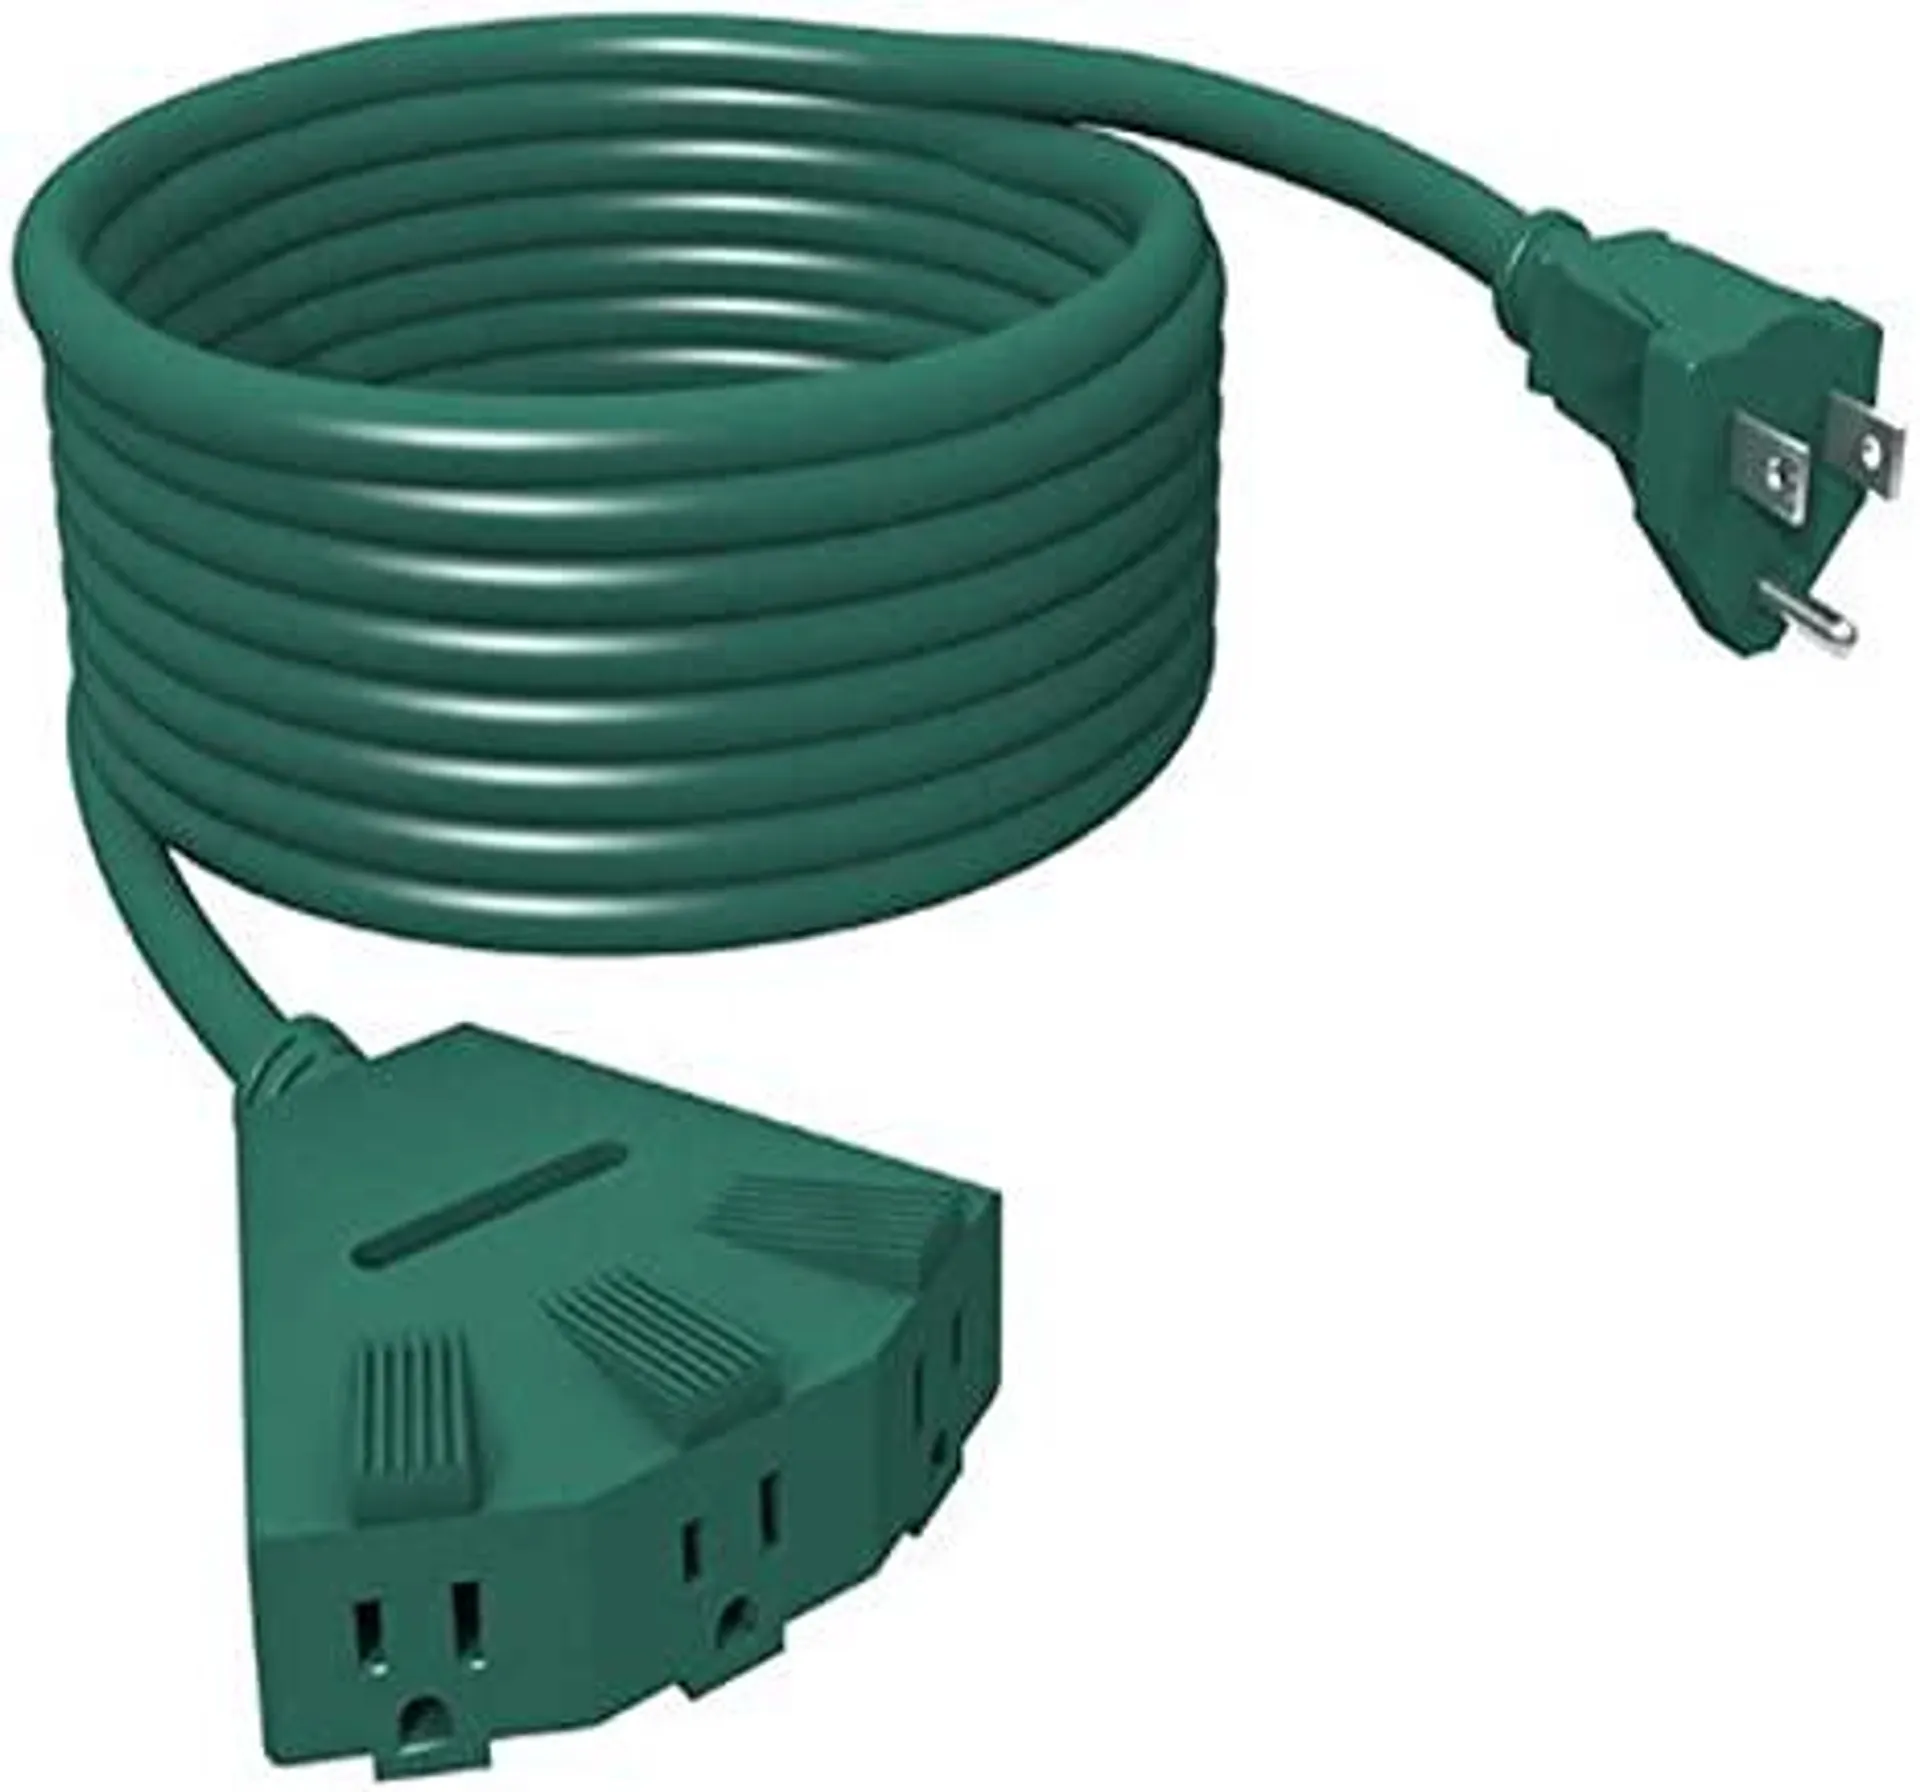 Stanley 31545 Grounded 3-Outlet Outdoor Power Extension Cord 3, 25-Feet, Green